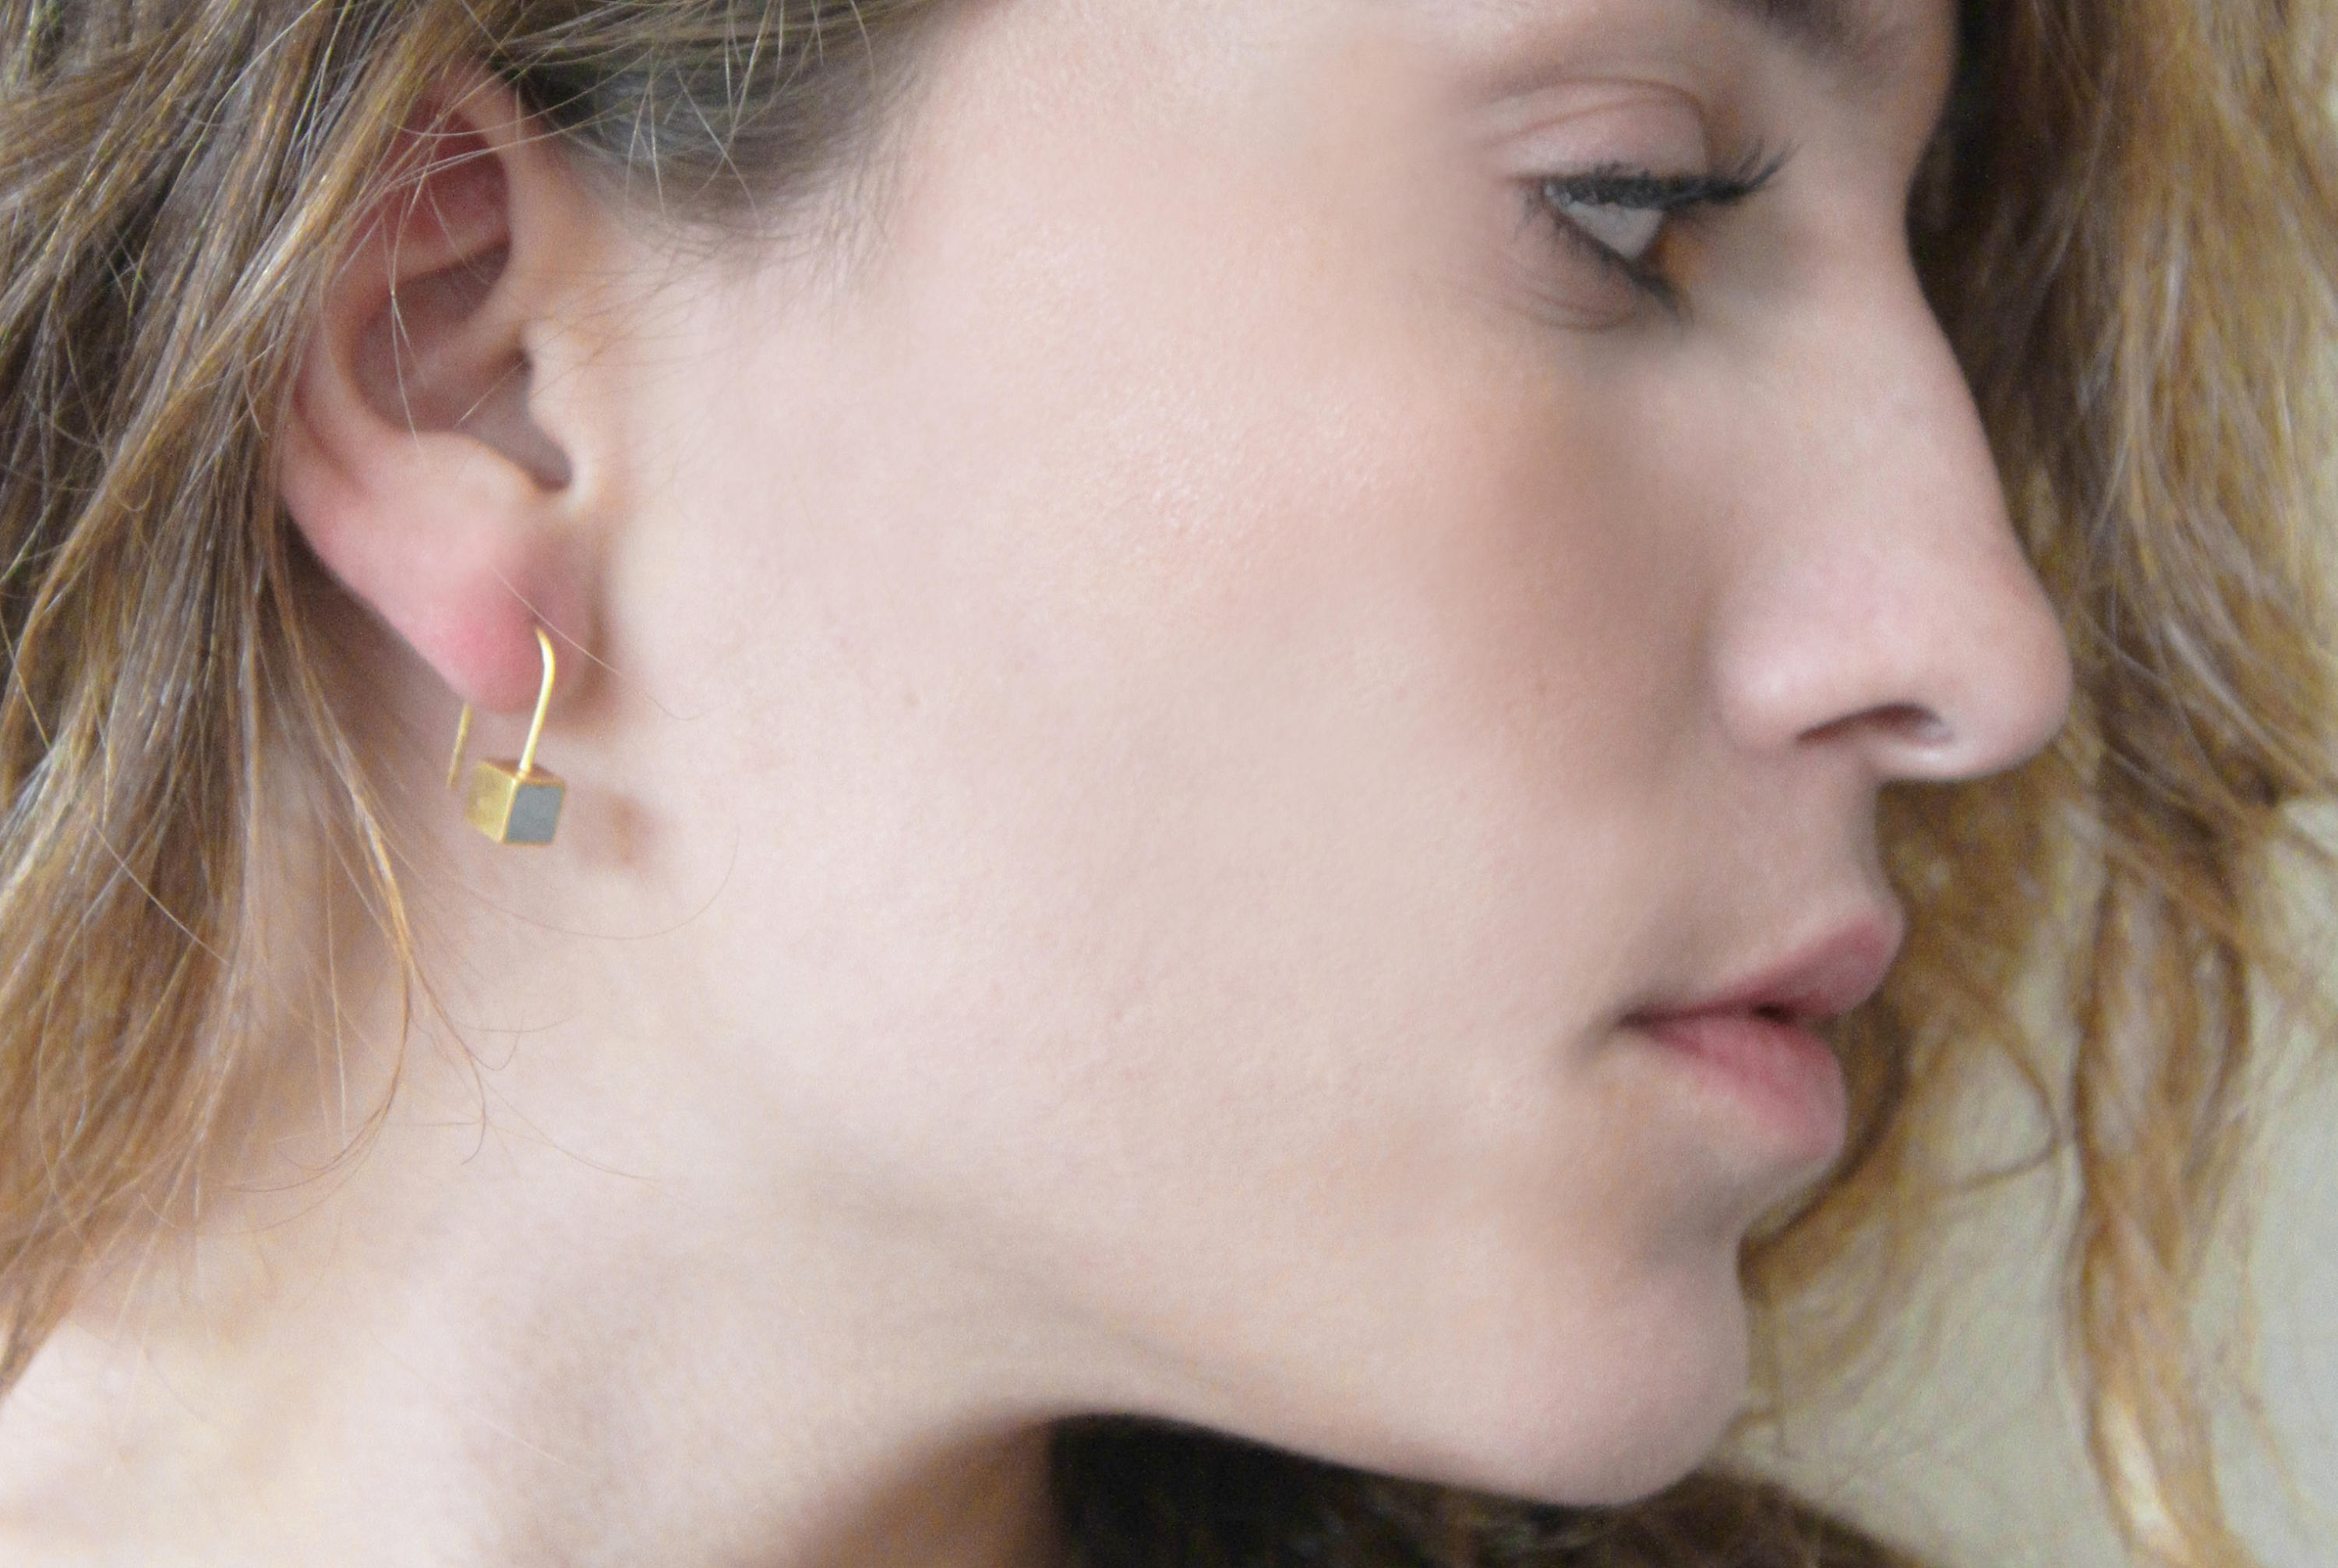 Tiny cube Gold & Concrete dangle Earrings with Gold leaf - hs